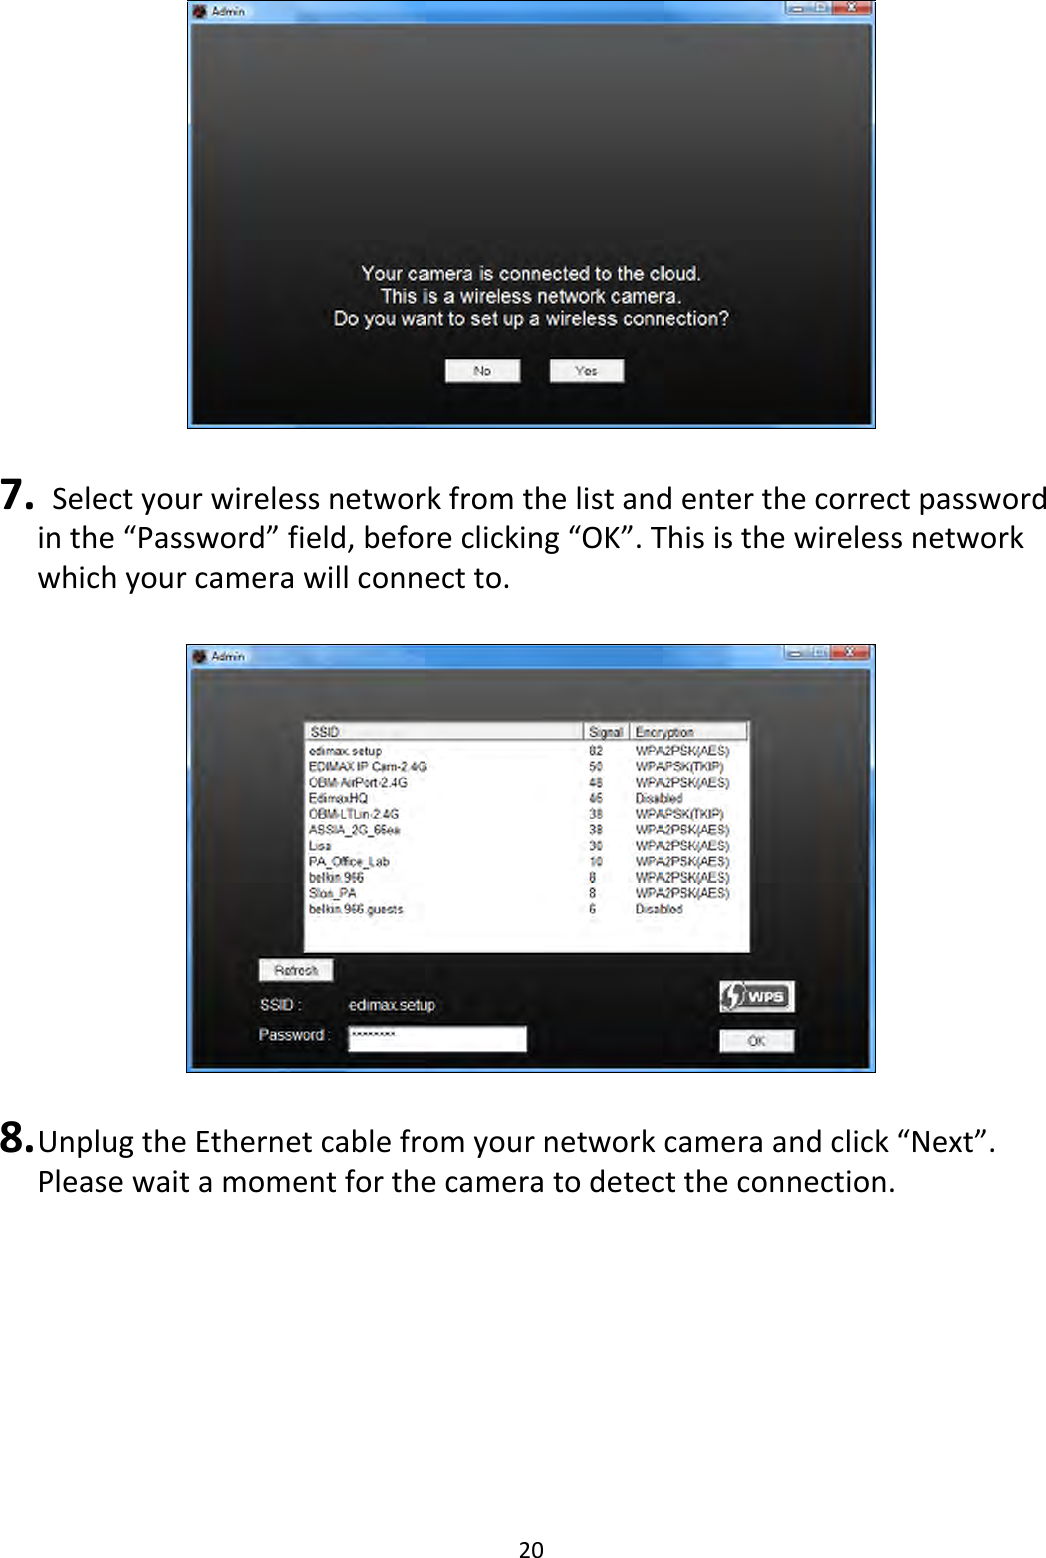 20    7.   Select your wireless network from the list and enter the correct password in the “Password” field, before clicking “OK”. This is the wireless network which your camera will connect to.    8. Unplug the Ethernet cable from your network camera and click “Next”. Please wait a moment for the camera to detect the connection.  